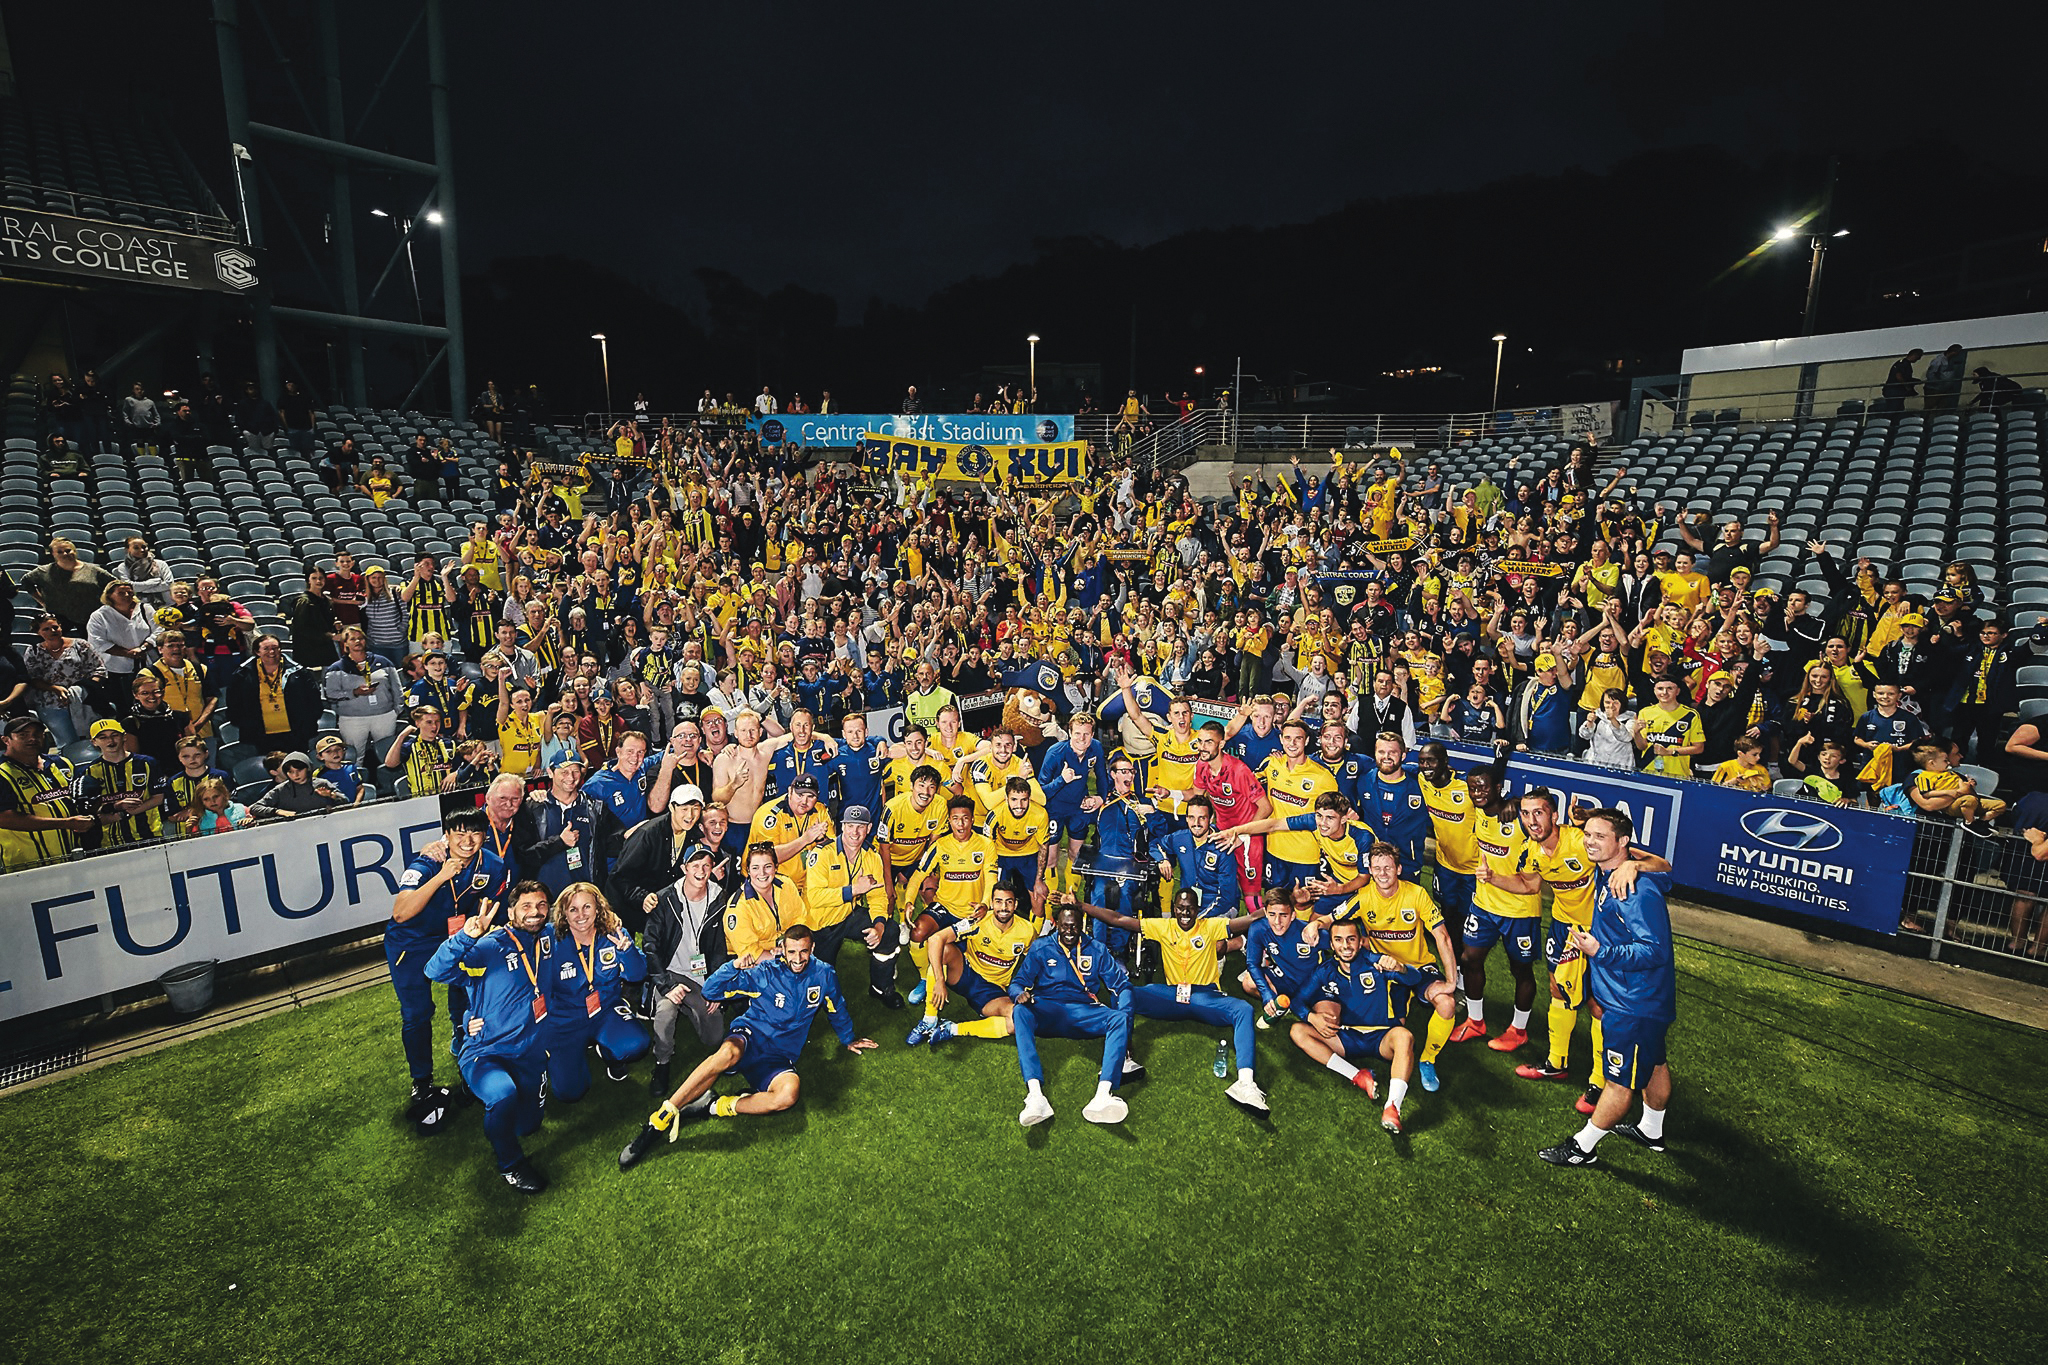 Central Coast Mariners on X: Happy New Year, Mariners fans! #CCMFC  #F3Derby  / X